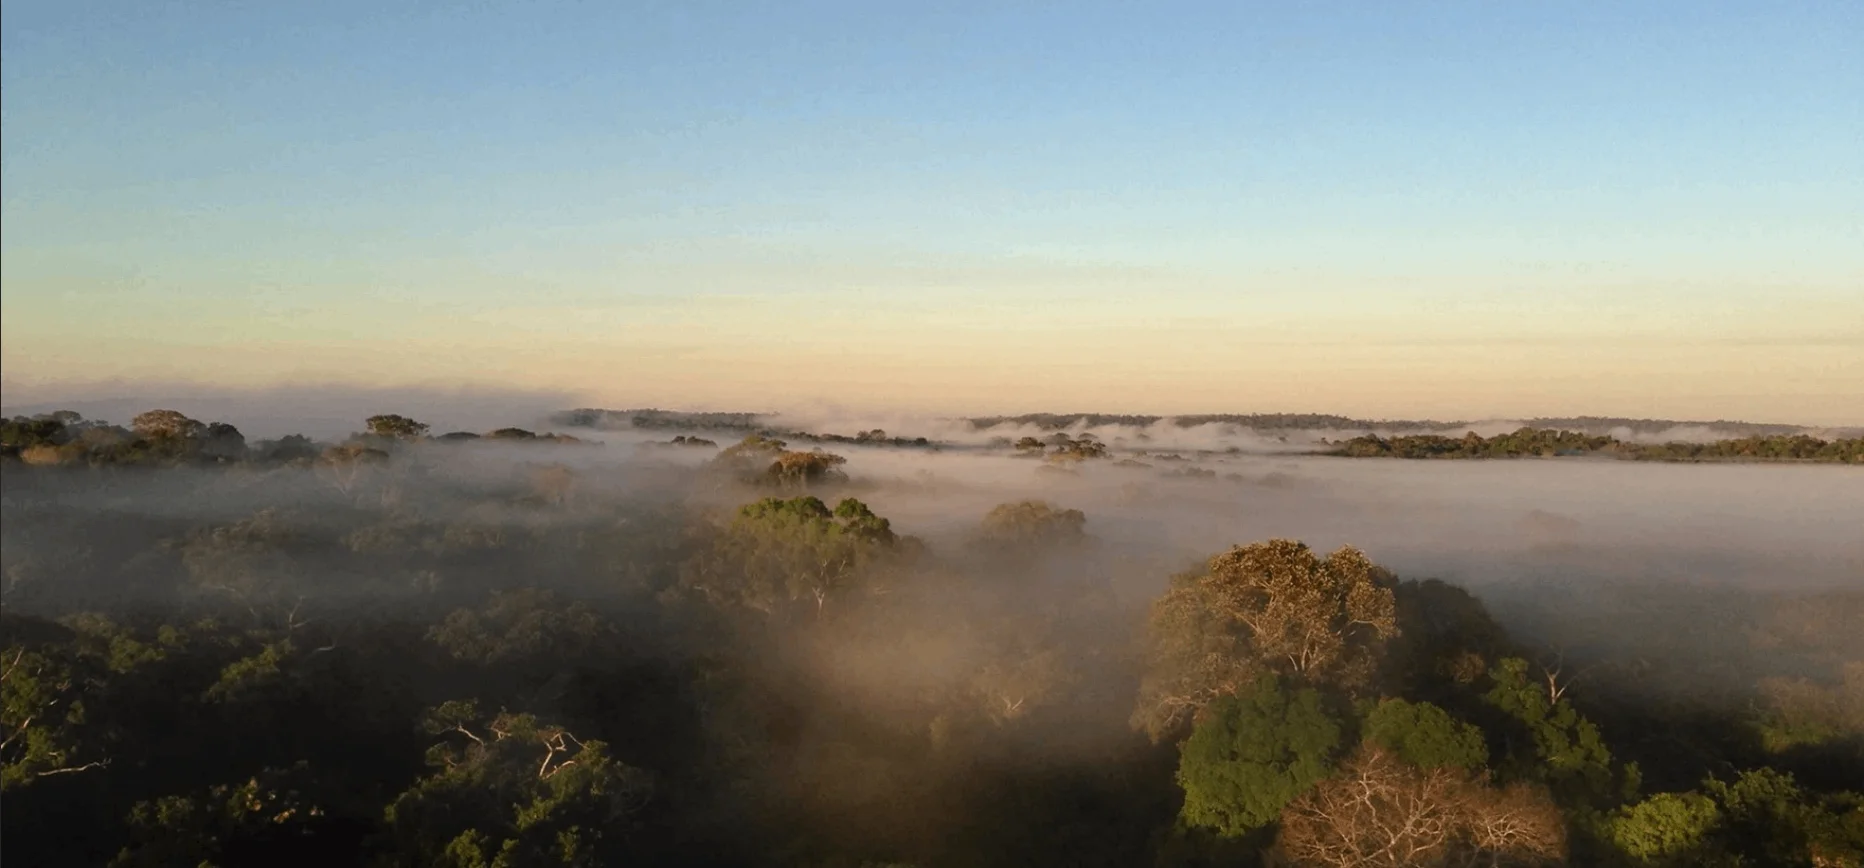 Image shows mist over the canopy of the Amazon rainforest